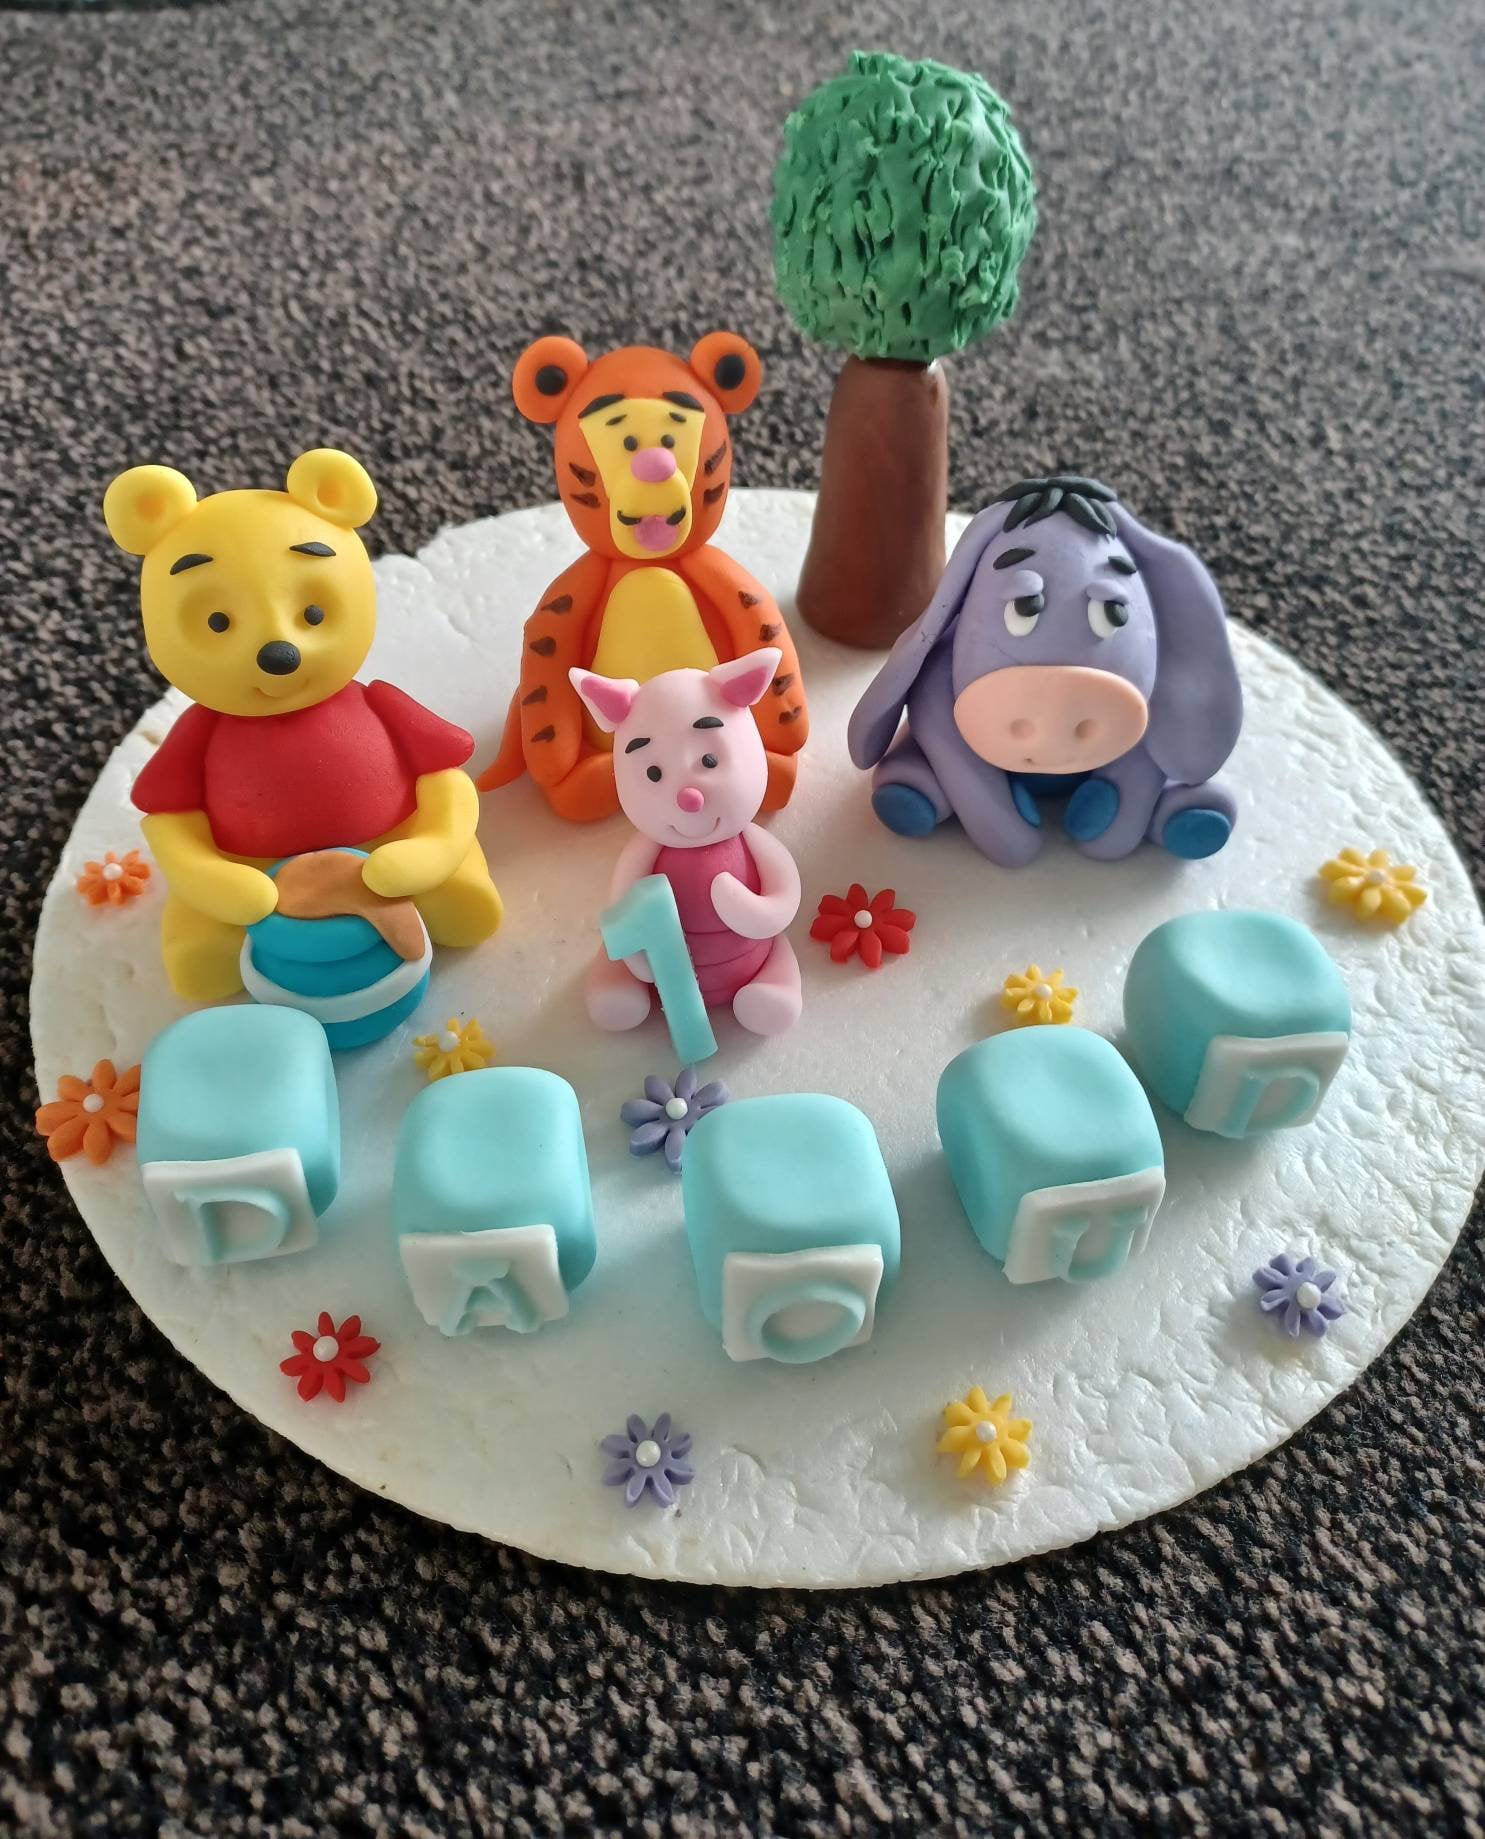 Edible handmade winnie the pooh and friends birthday christening cake topper